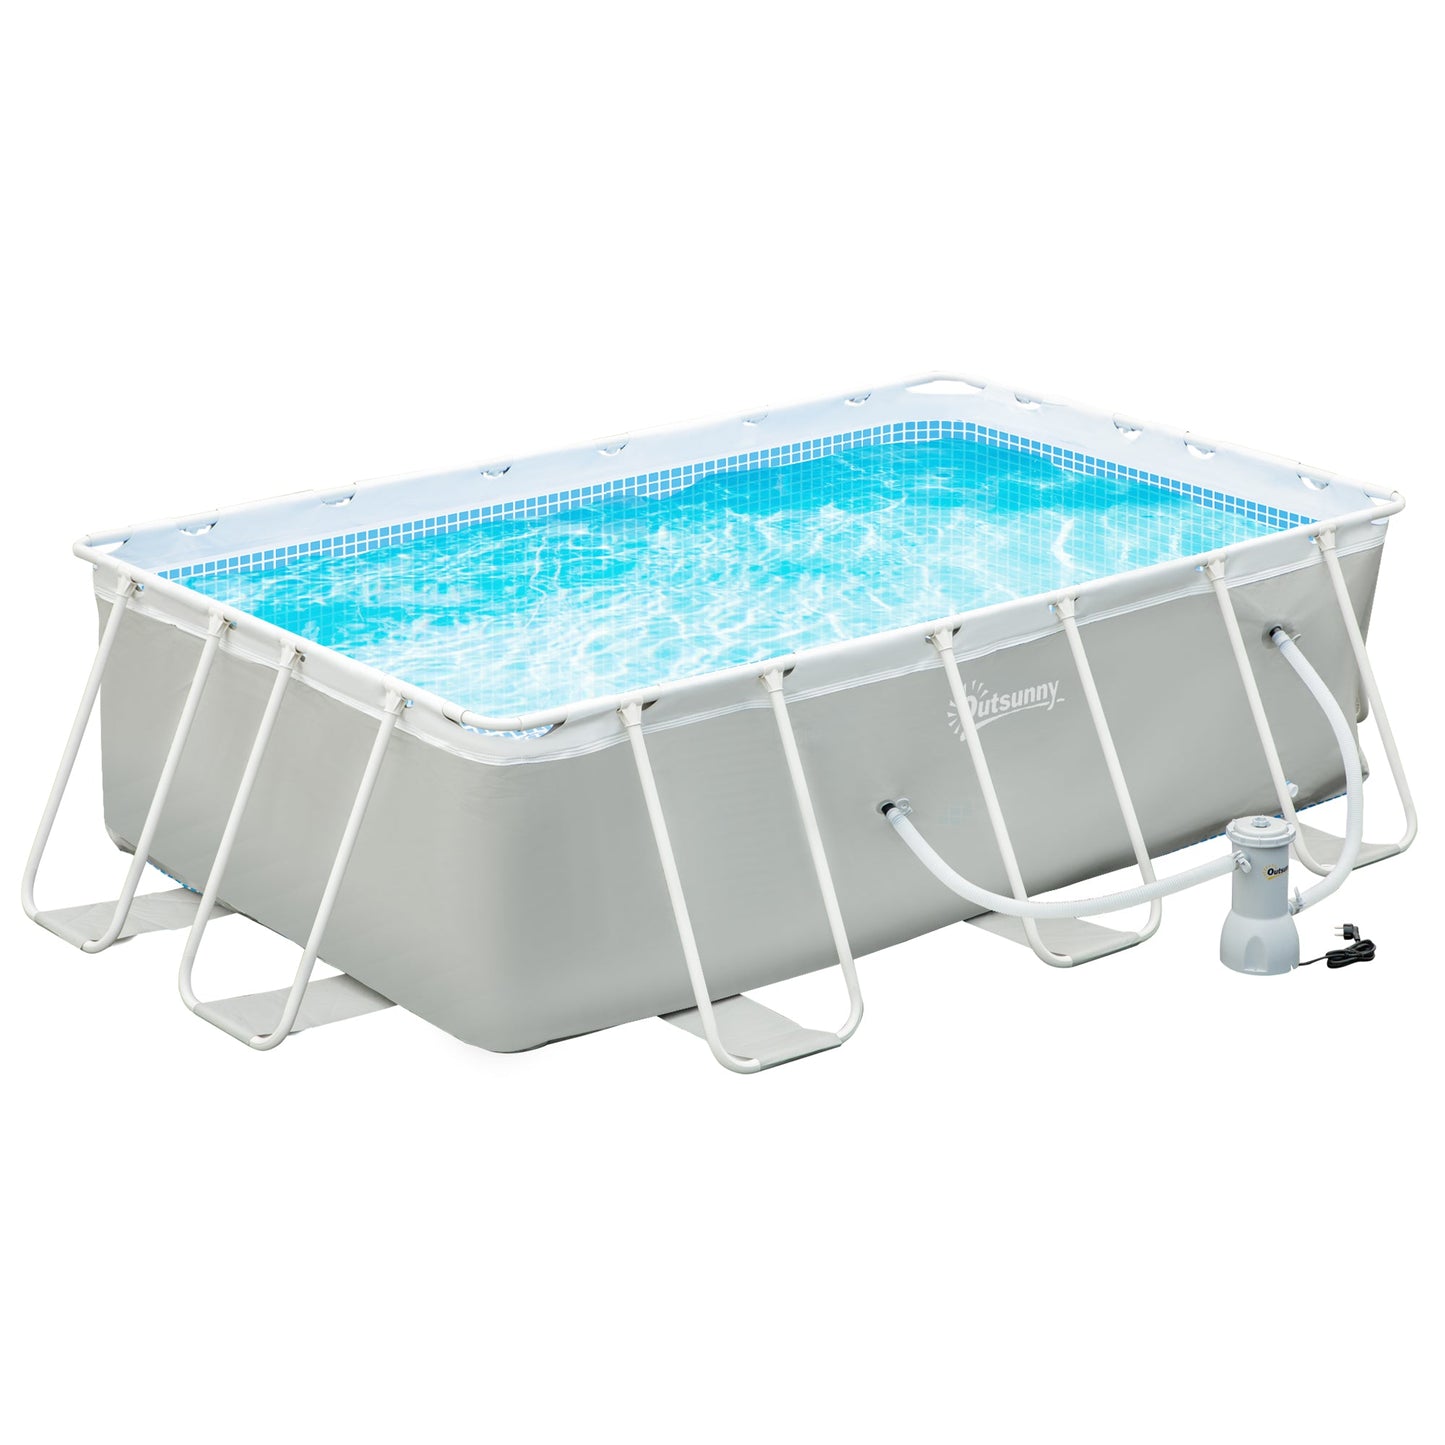 Outdoor and Garden-11ft x 7ft x 32in Steel Frame Pool with Filter Pump - Outdoor Style Company